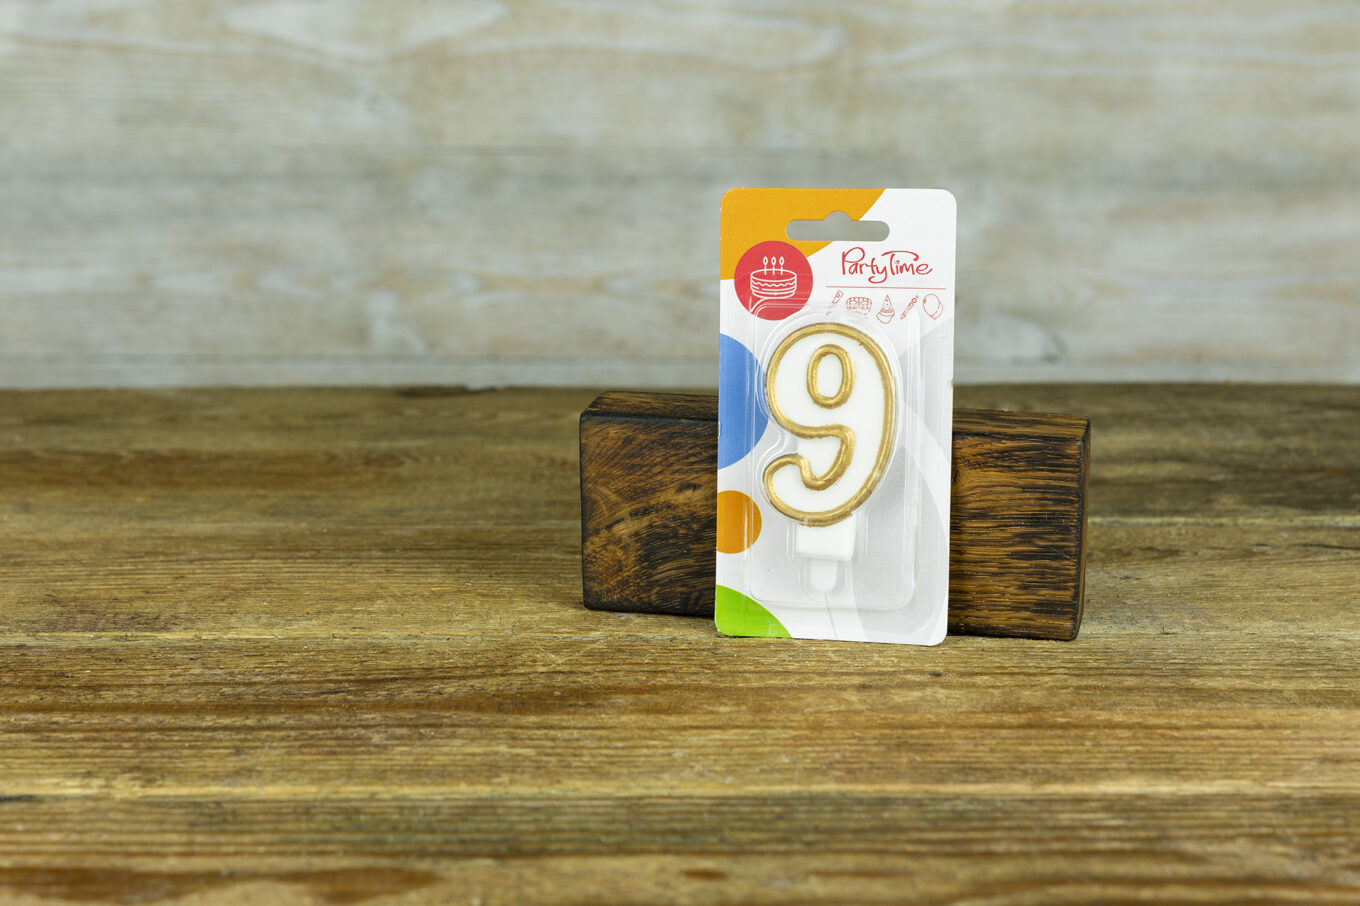 number 9 cake candle Cukiernia Jacek Placek is synonymous with the taste of homemade cakes made of natural products.